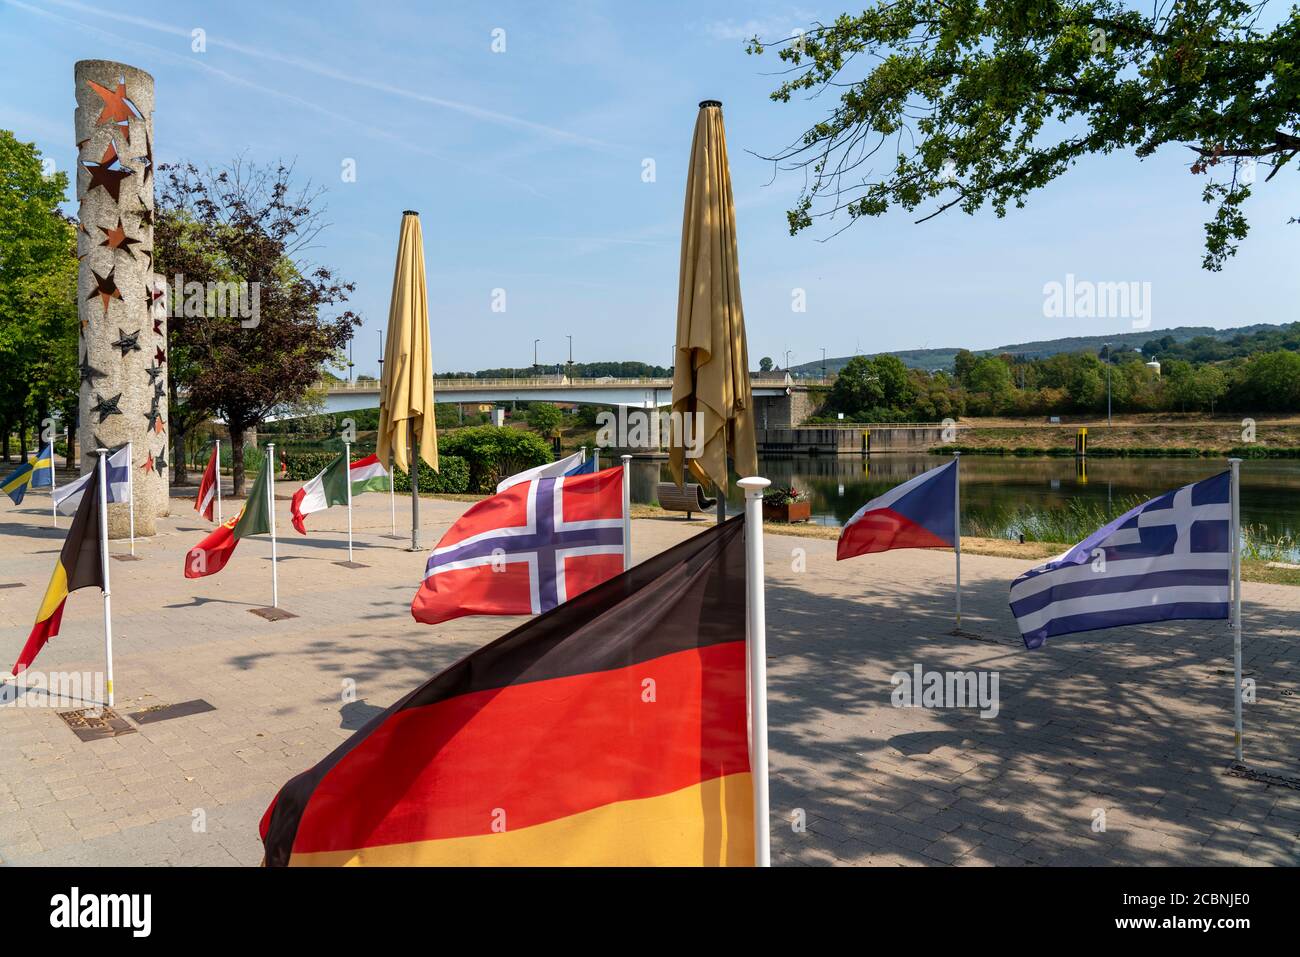 The town of Schengen, on the Moselle, in the Grand Duchy of Luxembourg, where the Schengen Agreement of 1985 was signed, European Monument at the Muse Stock Photo